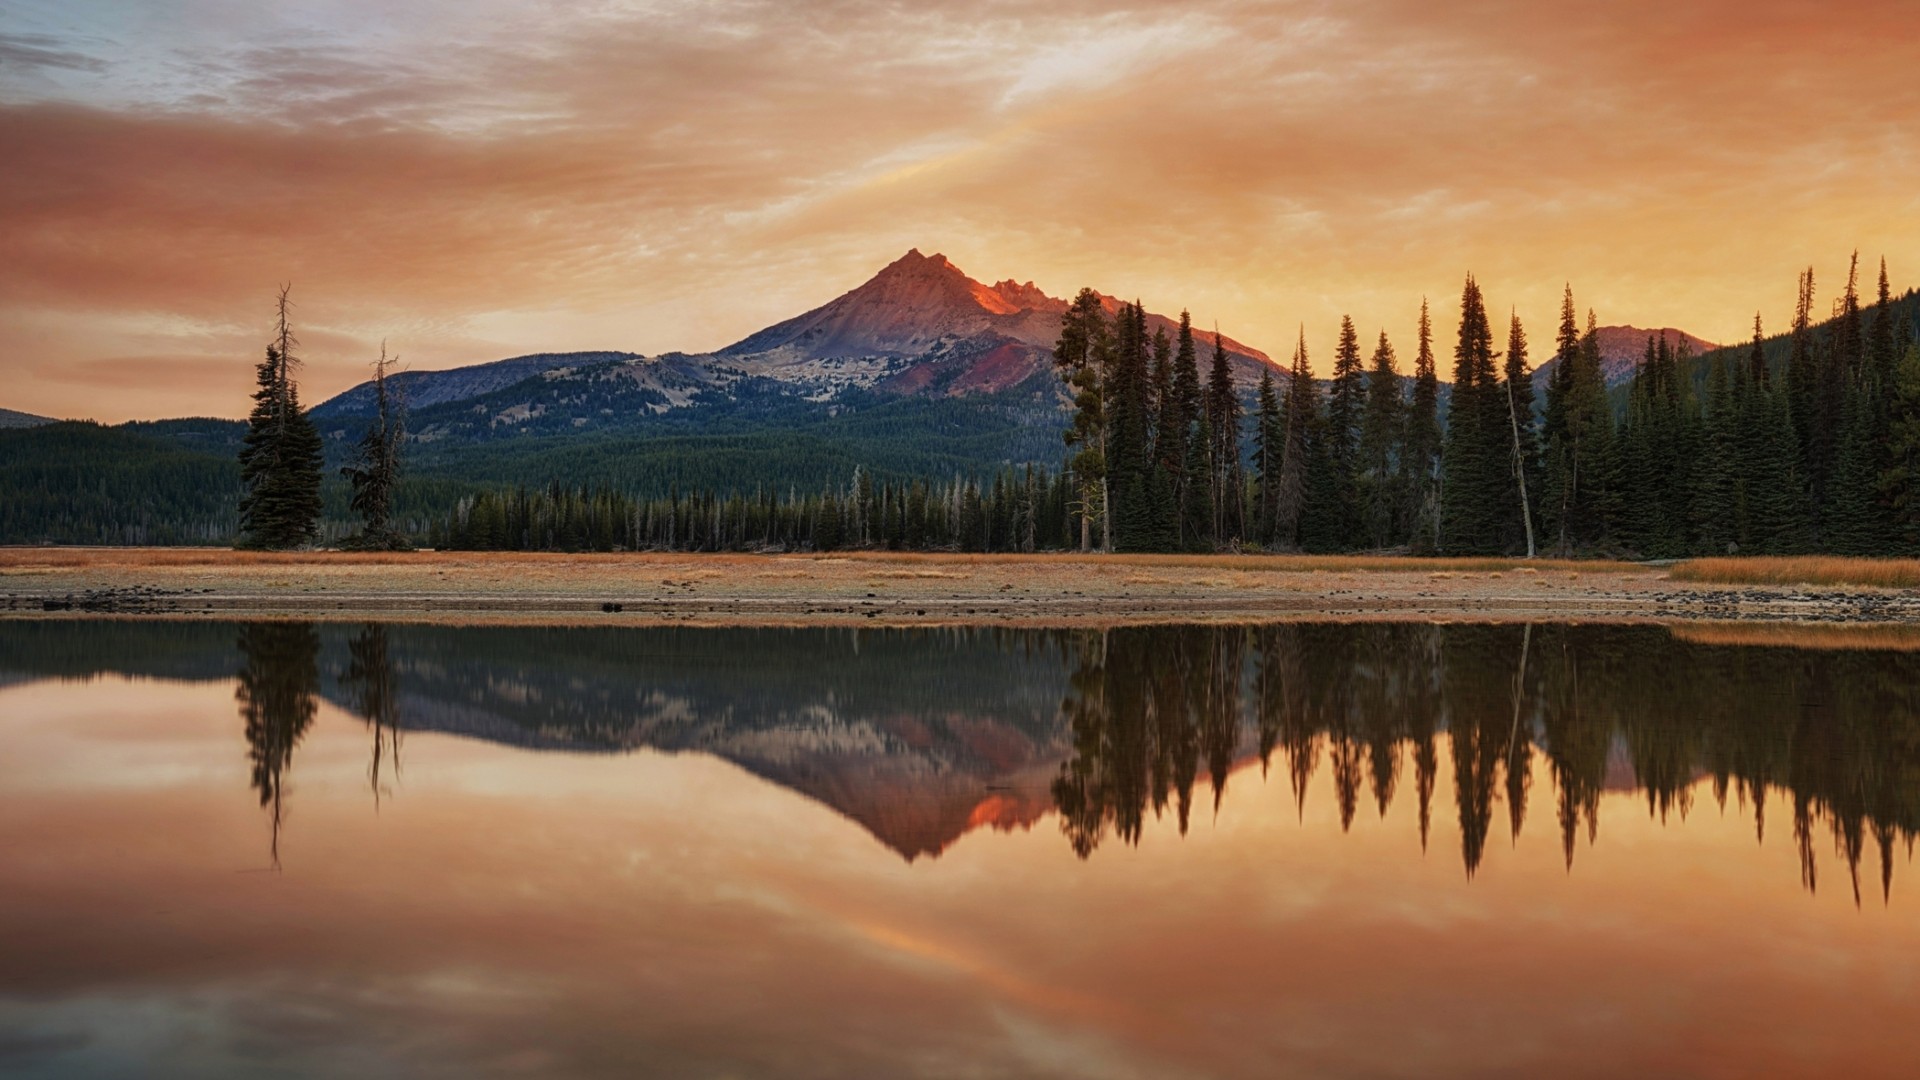 General 1920x1080 nature landscape mountains water clouds trees forest lake reflection sunset